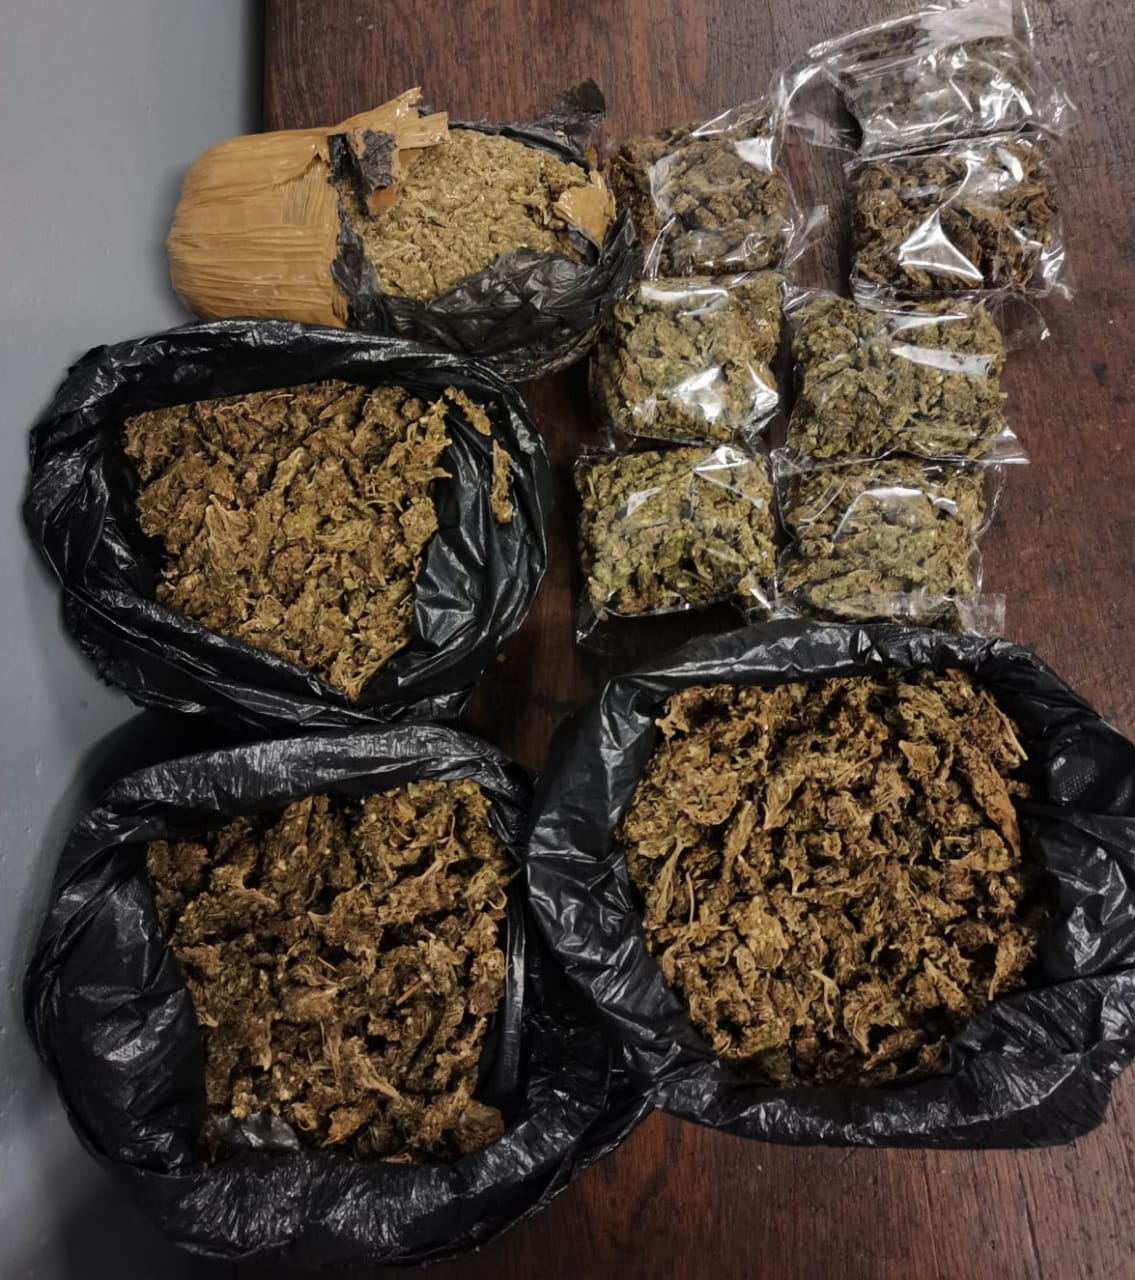 Police confiscates drugs worth R20 000 and arrest shoemaker in knysna